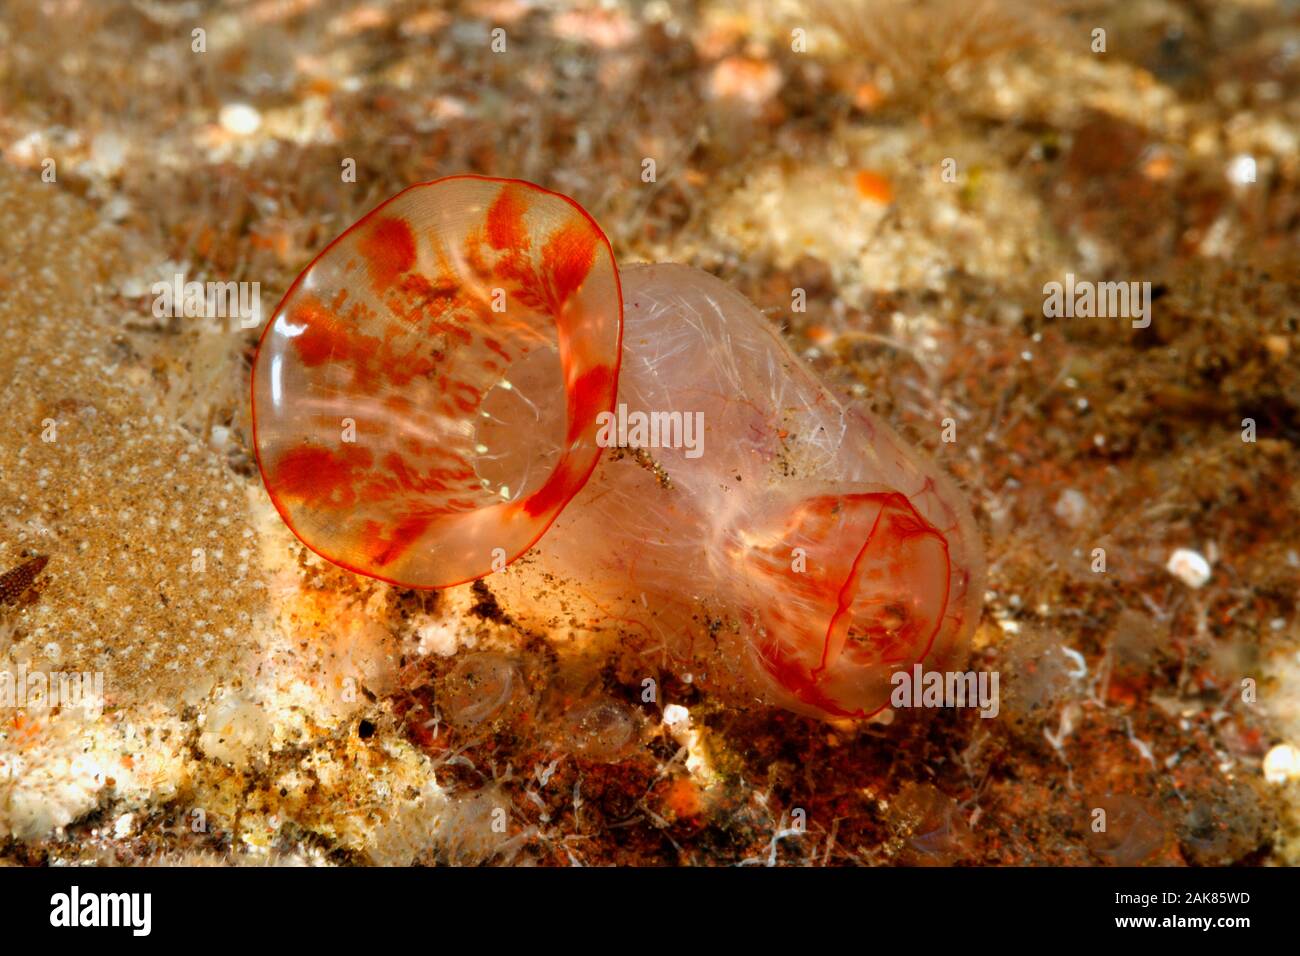 Ascidian, also called a Tunicate or Sea Squirt. Possibly Pyura momus.  Tulamben, Bali, Indonesia. Bali Sea, Indian Ocean Stock Photo